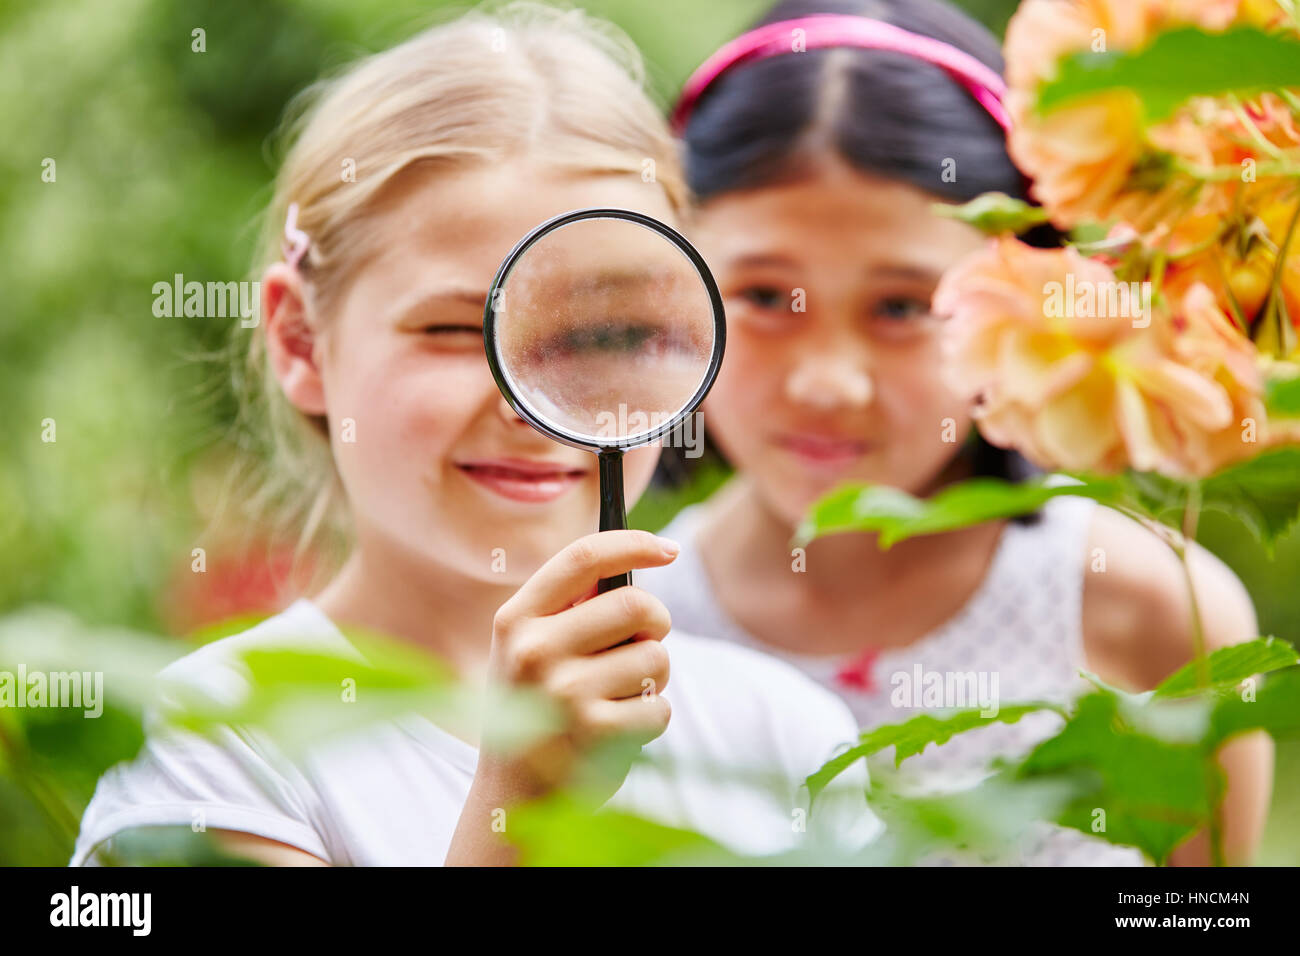 Children looking at flowers with curiosity using magnifying glass in nature Stock Photo